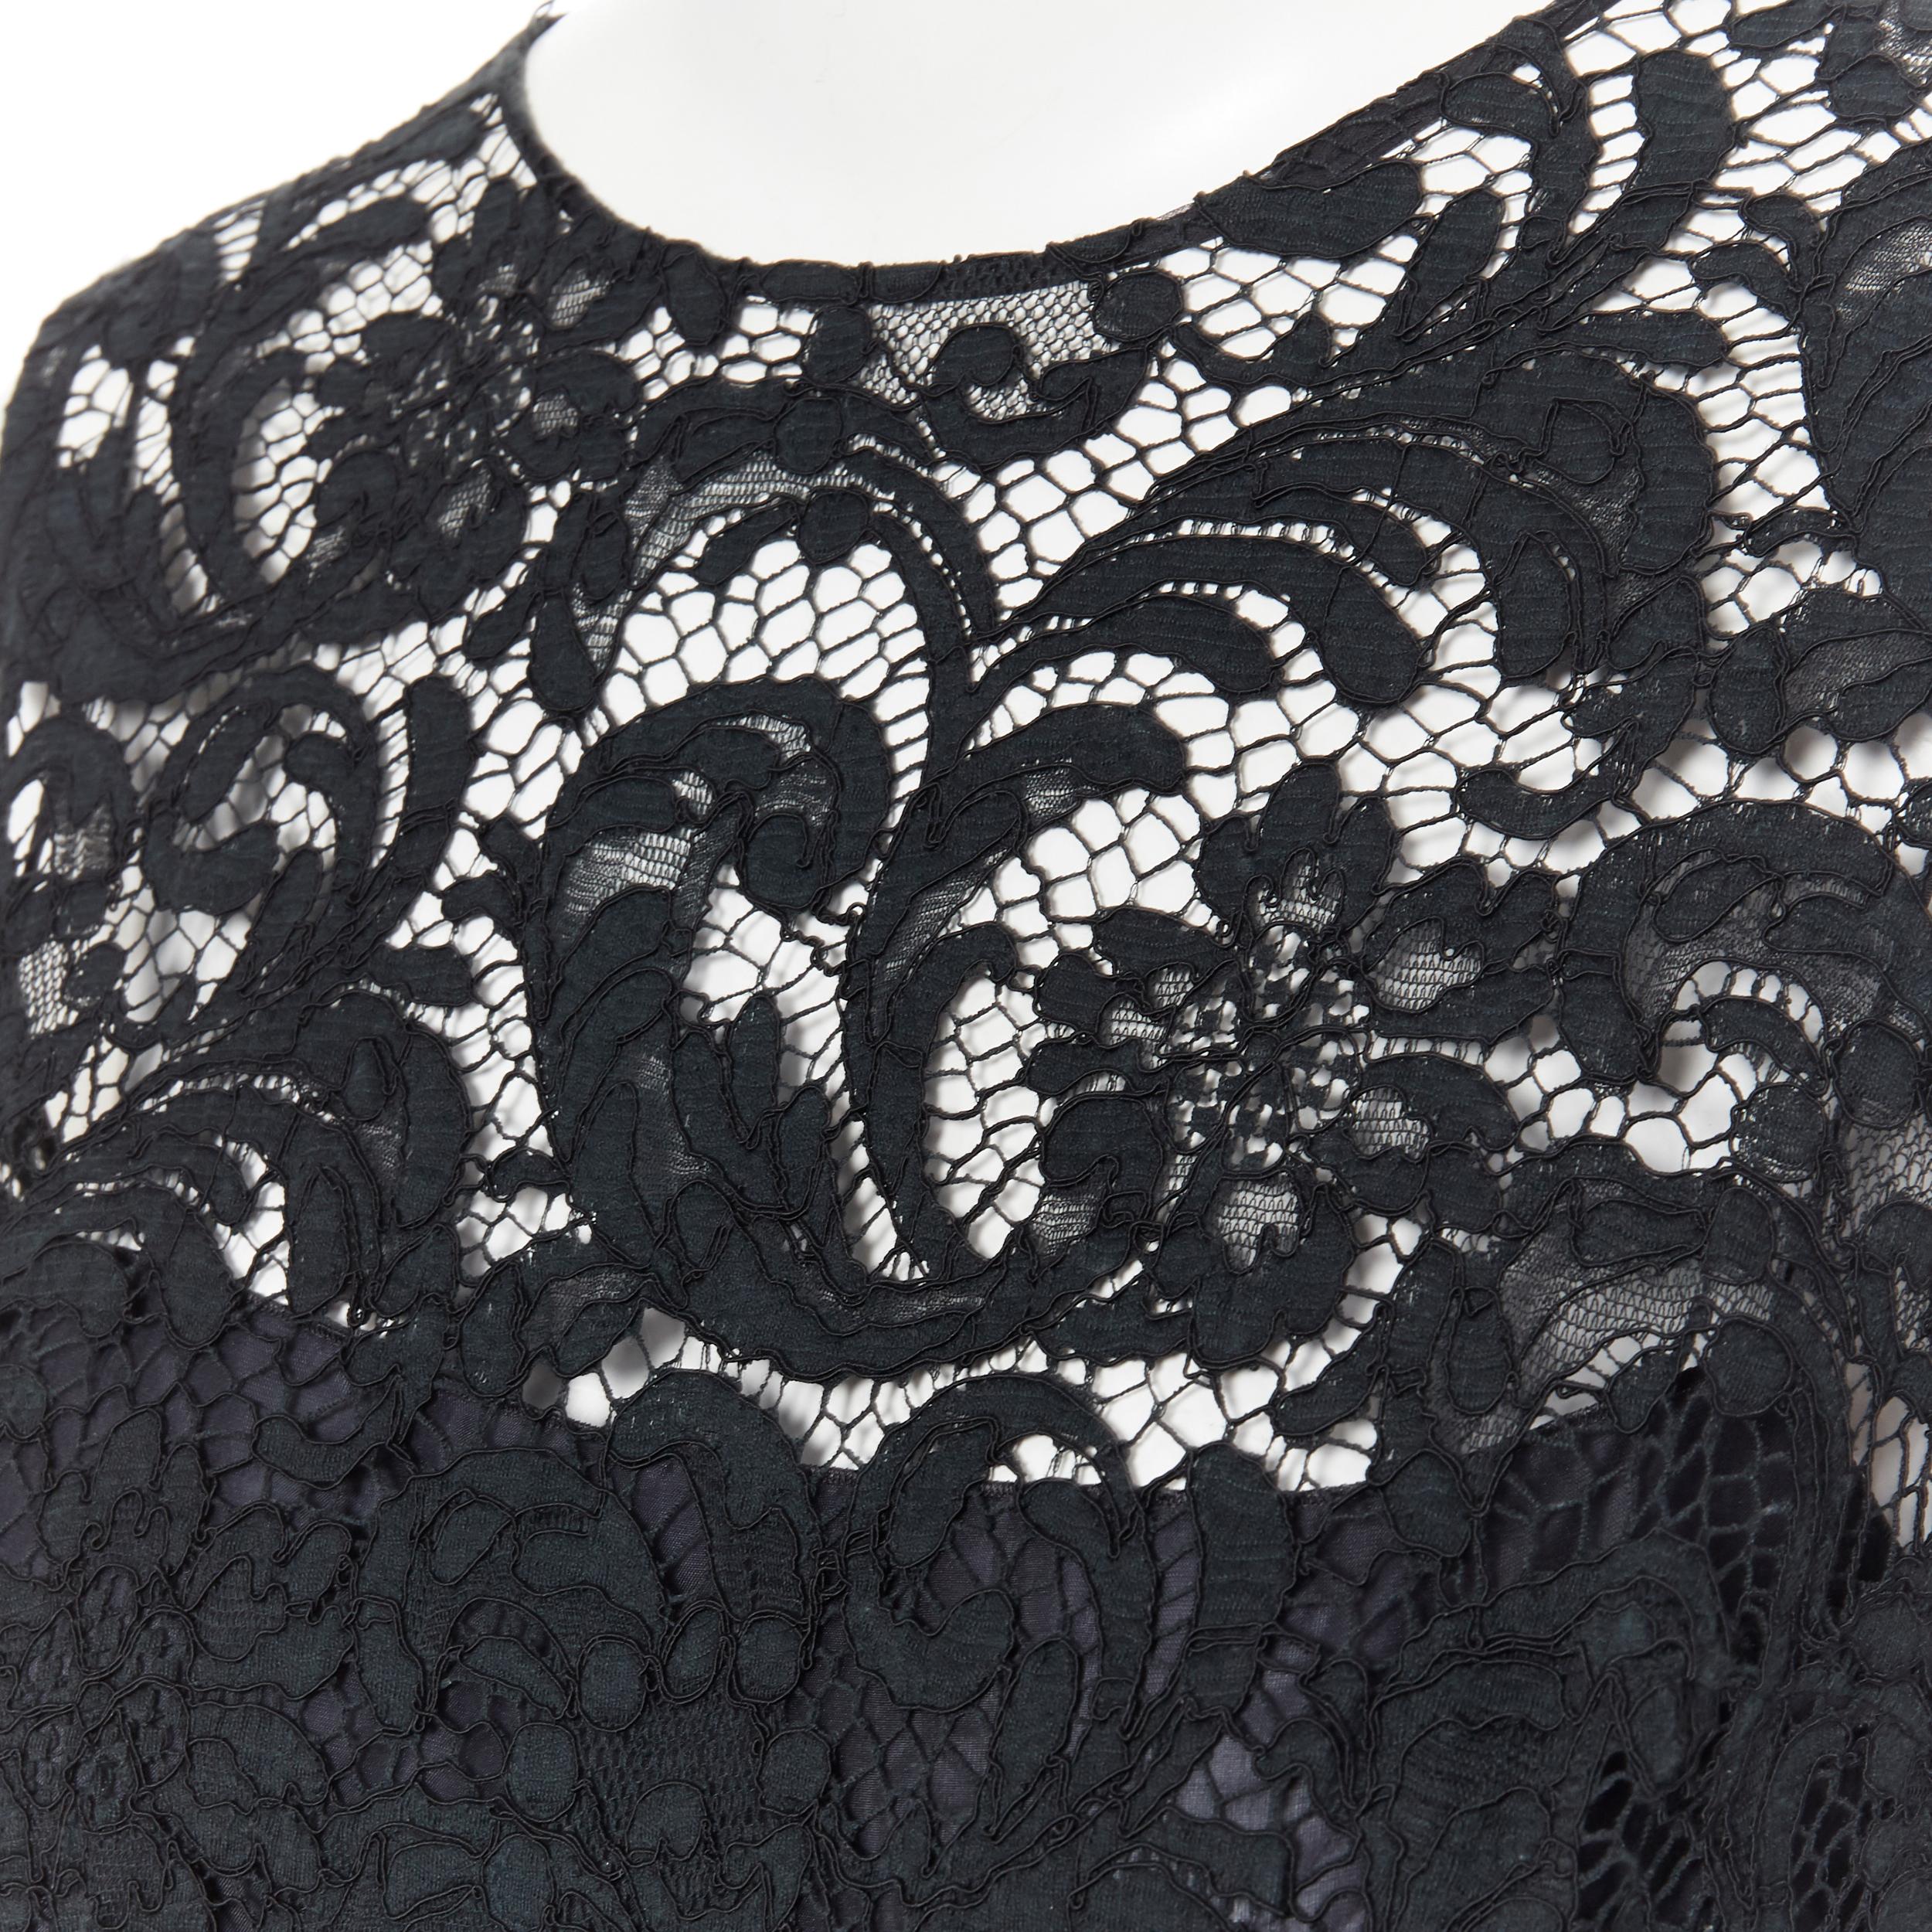 PRADA 2008 black floral lace lined sleeveless cocktail dress IT38
Brand: Prada
Designer: Miuccia Prada
Collection: 2008
Model Name / Style: Lace dress
Material: Lace
Color: Black
Pattern: Floral
Closure: Zip
Extra Detail: Sleeveless. Round neck